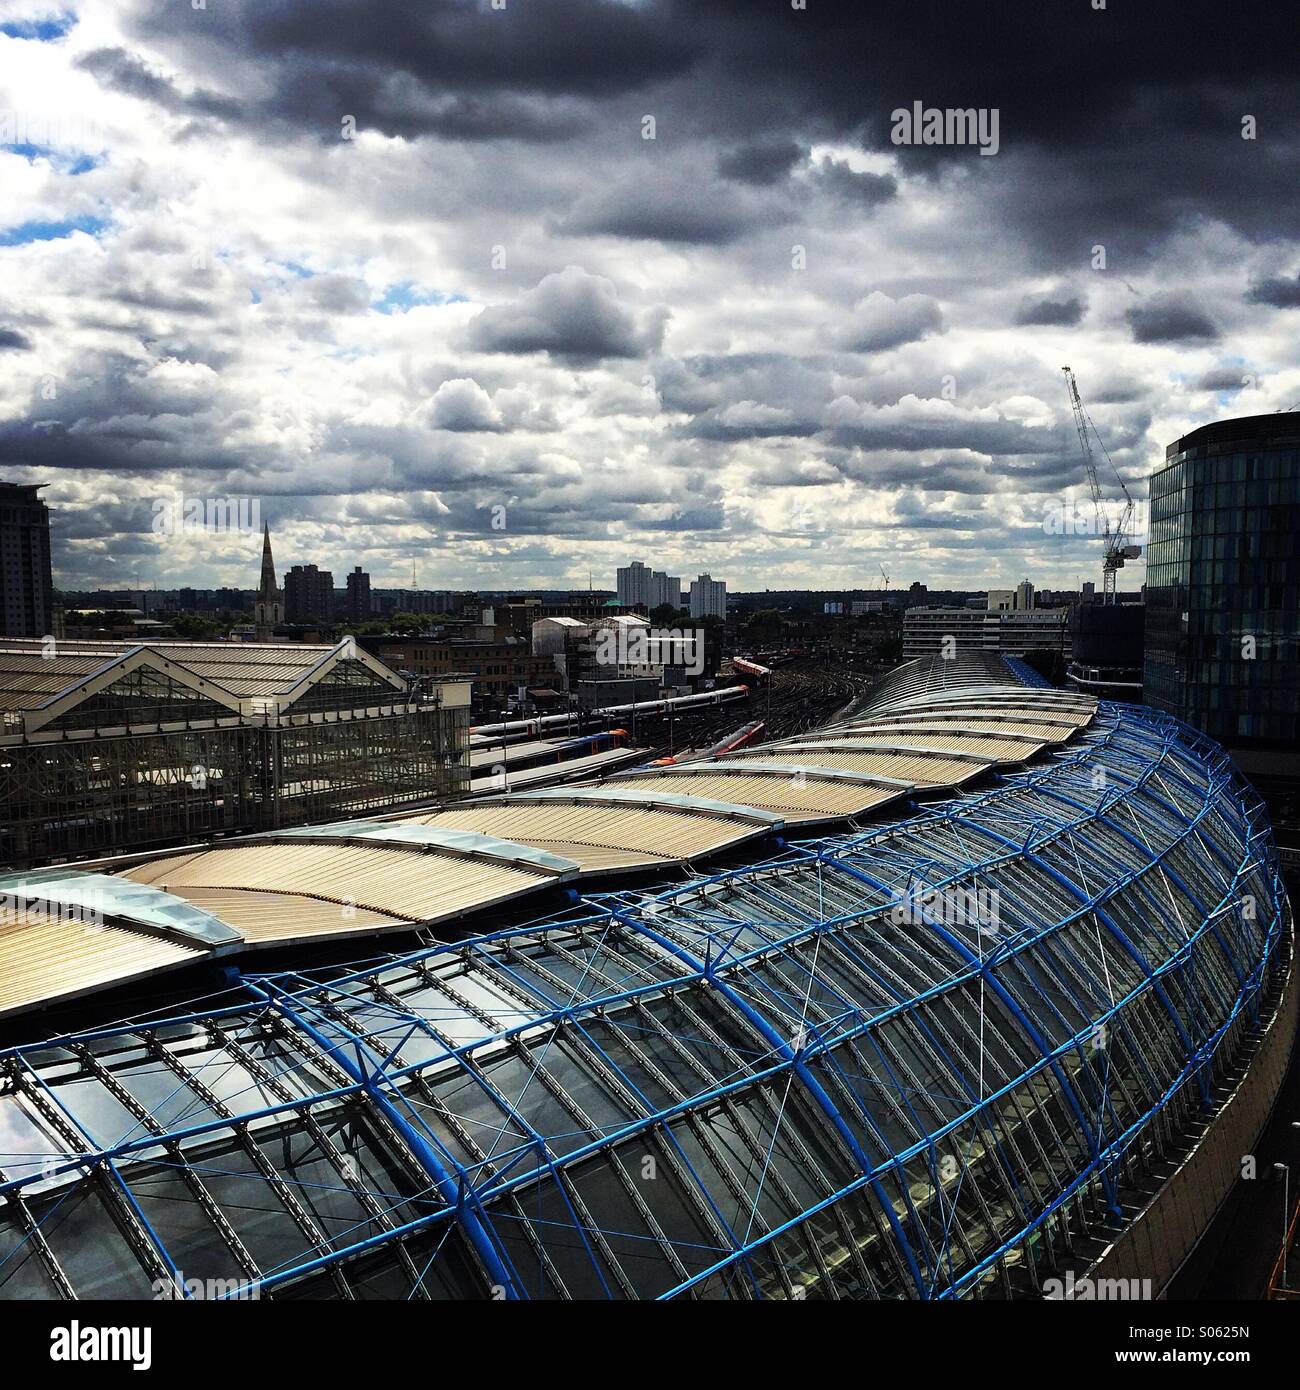 Waterloo Station roof sweep under stormy sky Stock Photo